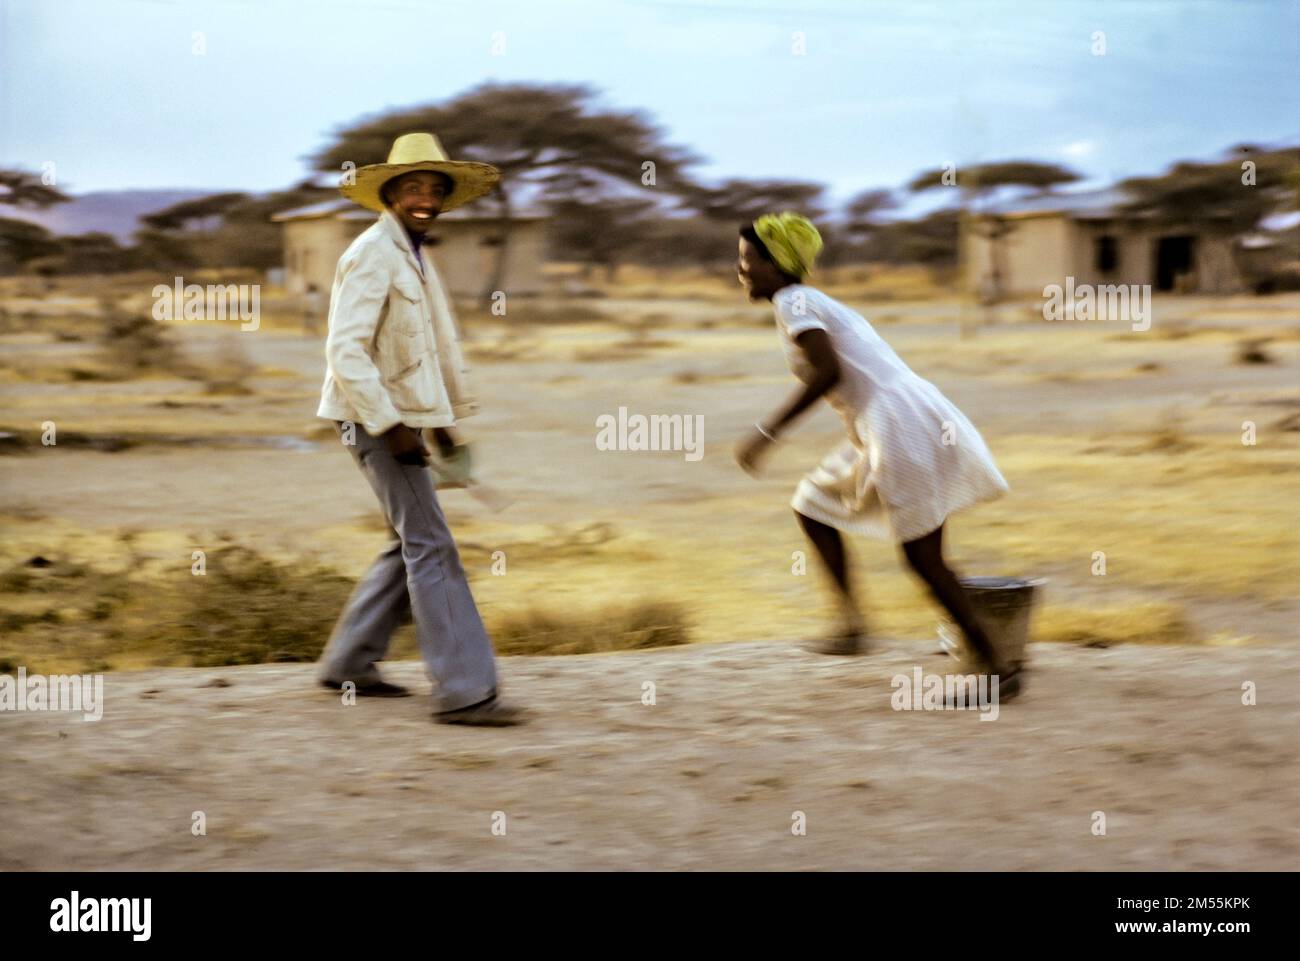 Ethiopia, 1970s, Adami Tulu, man with hat having fun with a young woman, after sunset, Oromia region, East Africa, Stock Photo